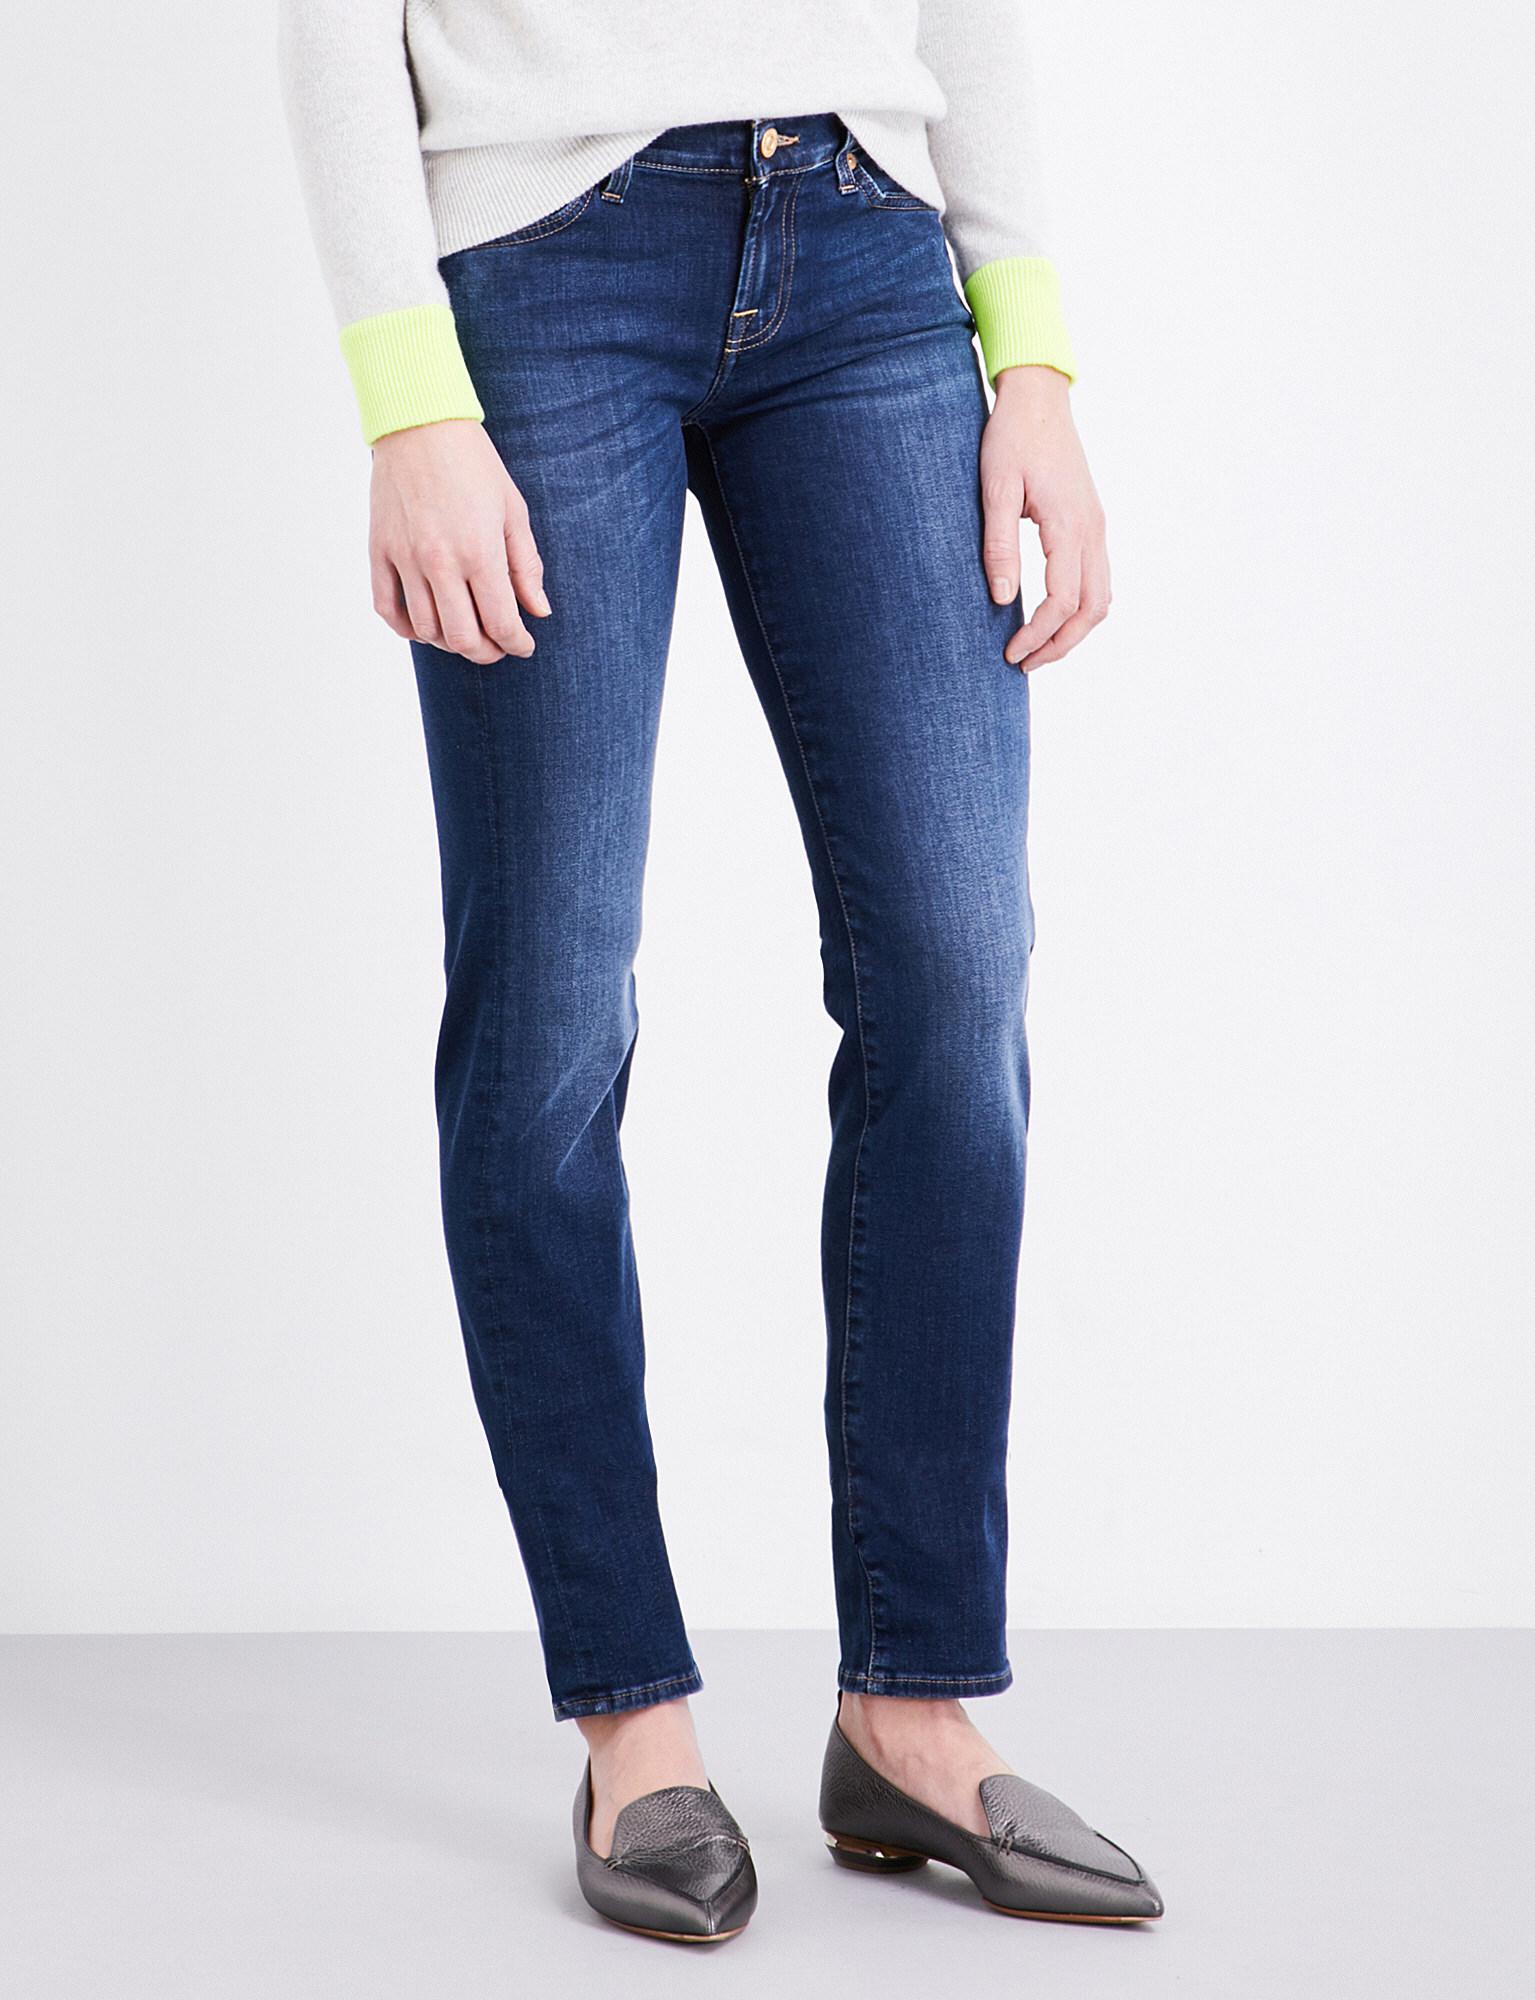 Lyst - 7 For All Mankind Roxanne Skinny Mid-rise Jeans in Blue